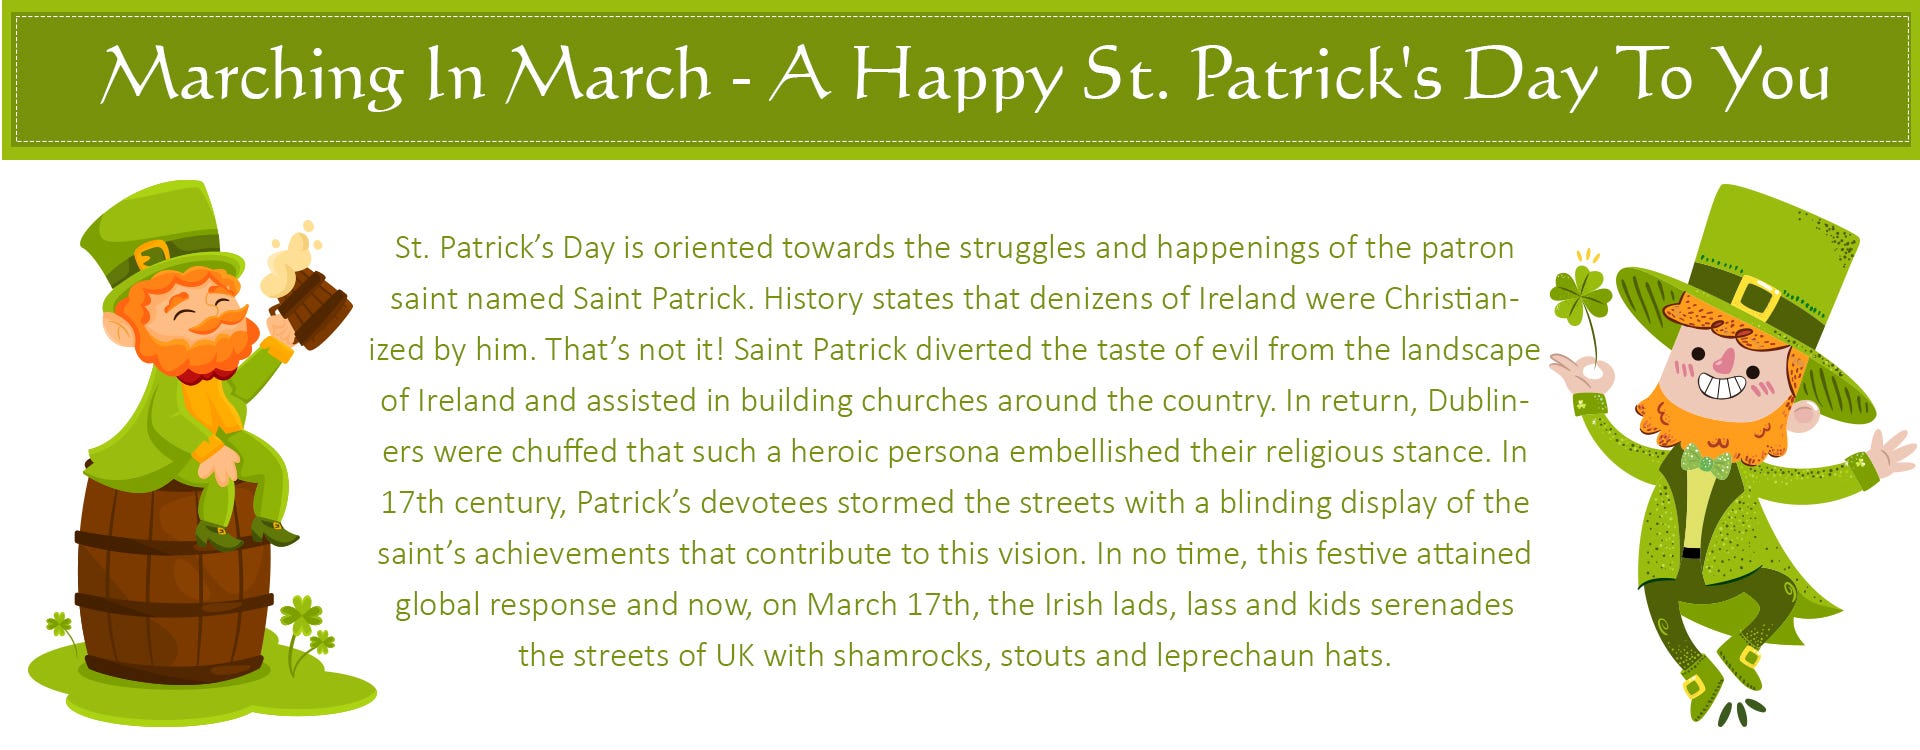 Marching In March - A Happy St. Patrick's Day To You